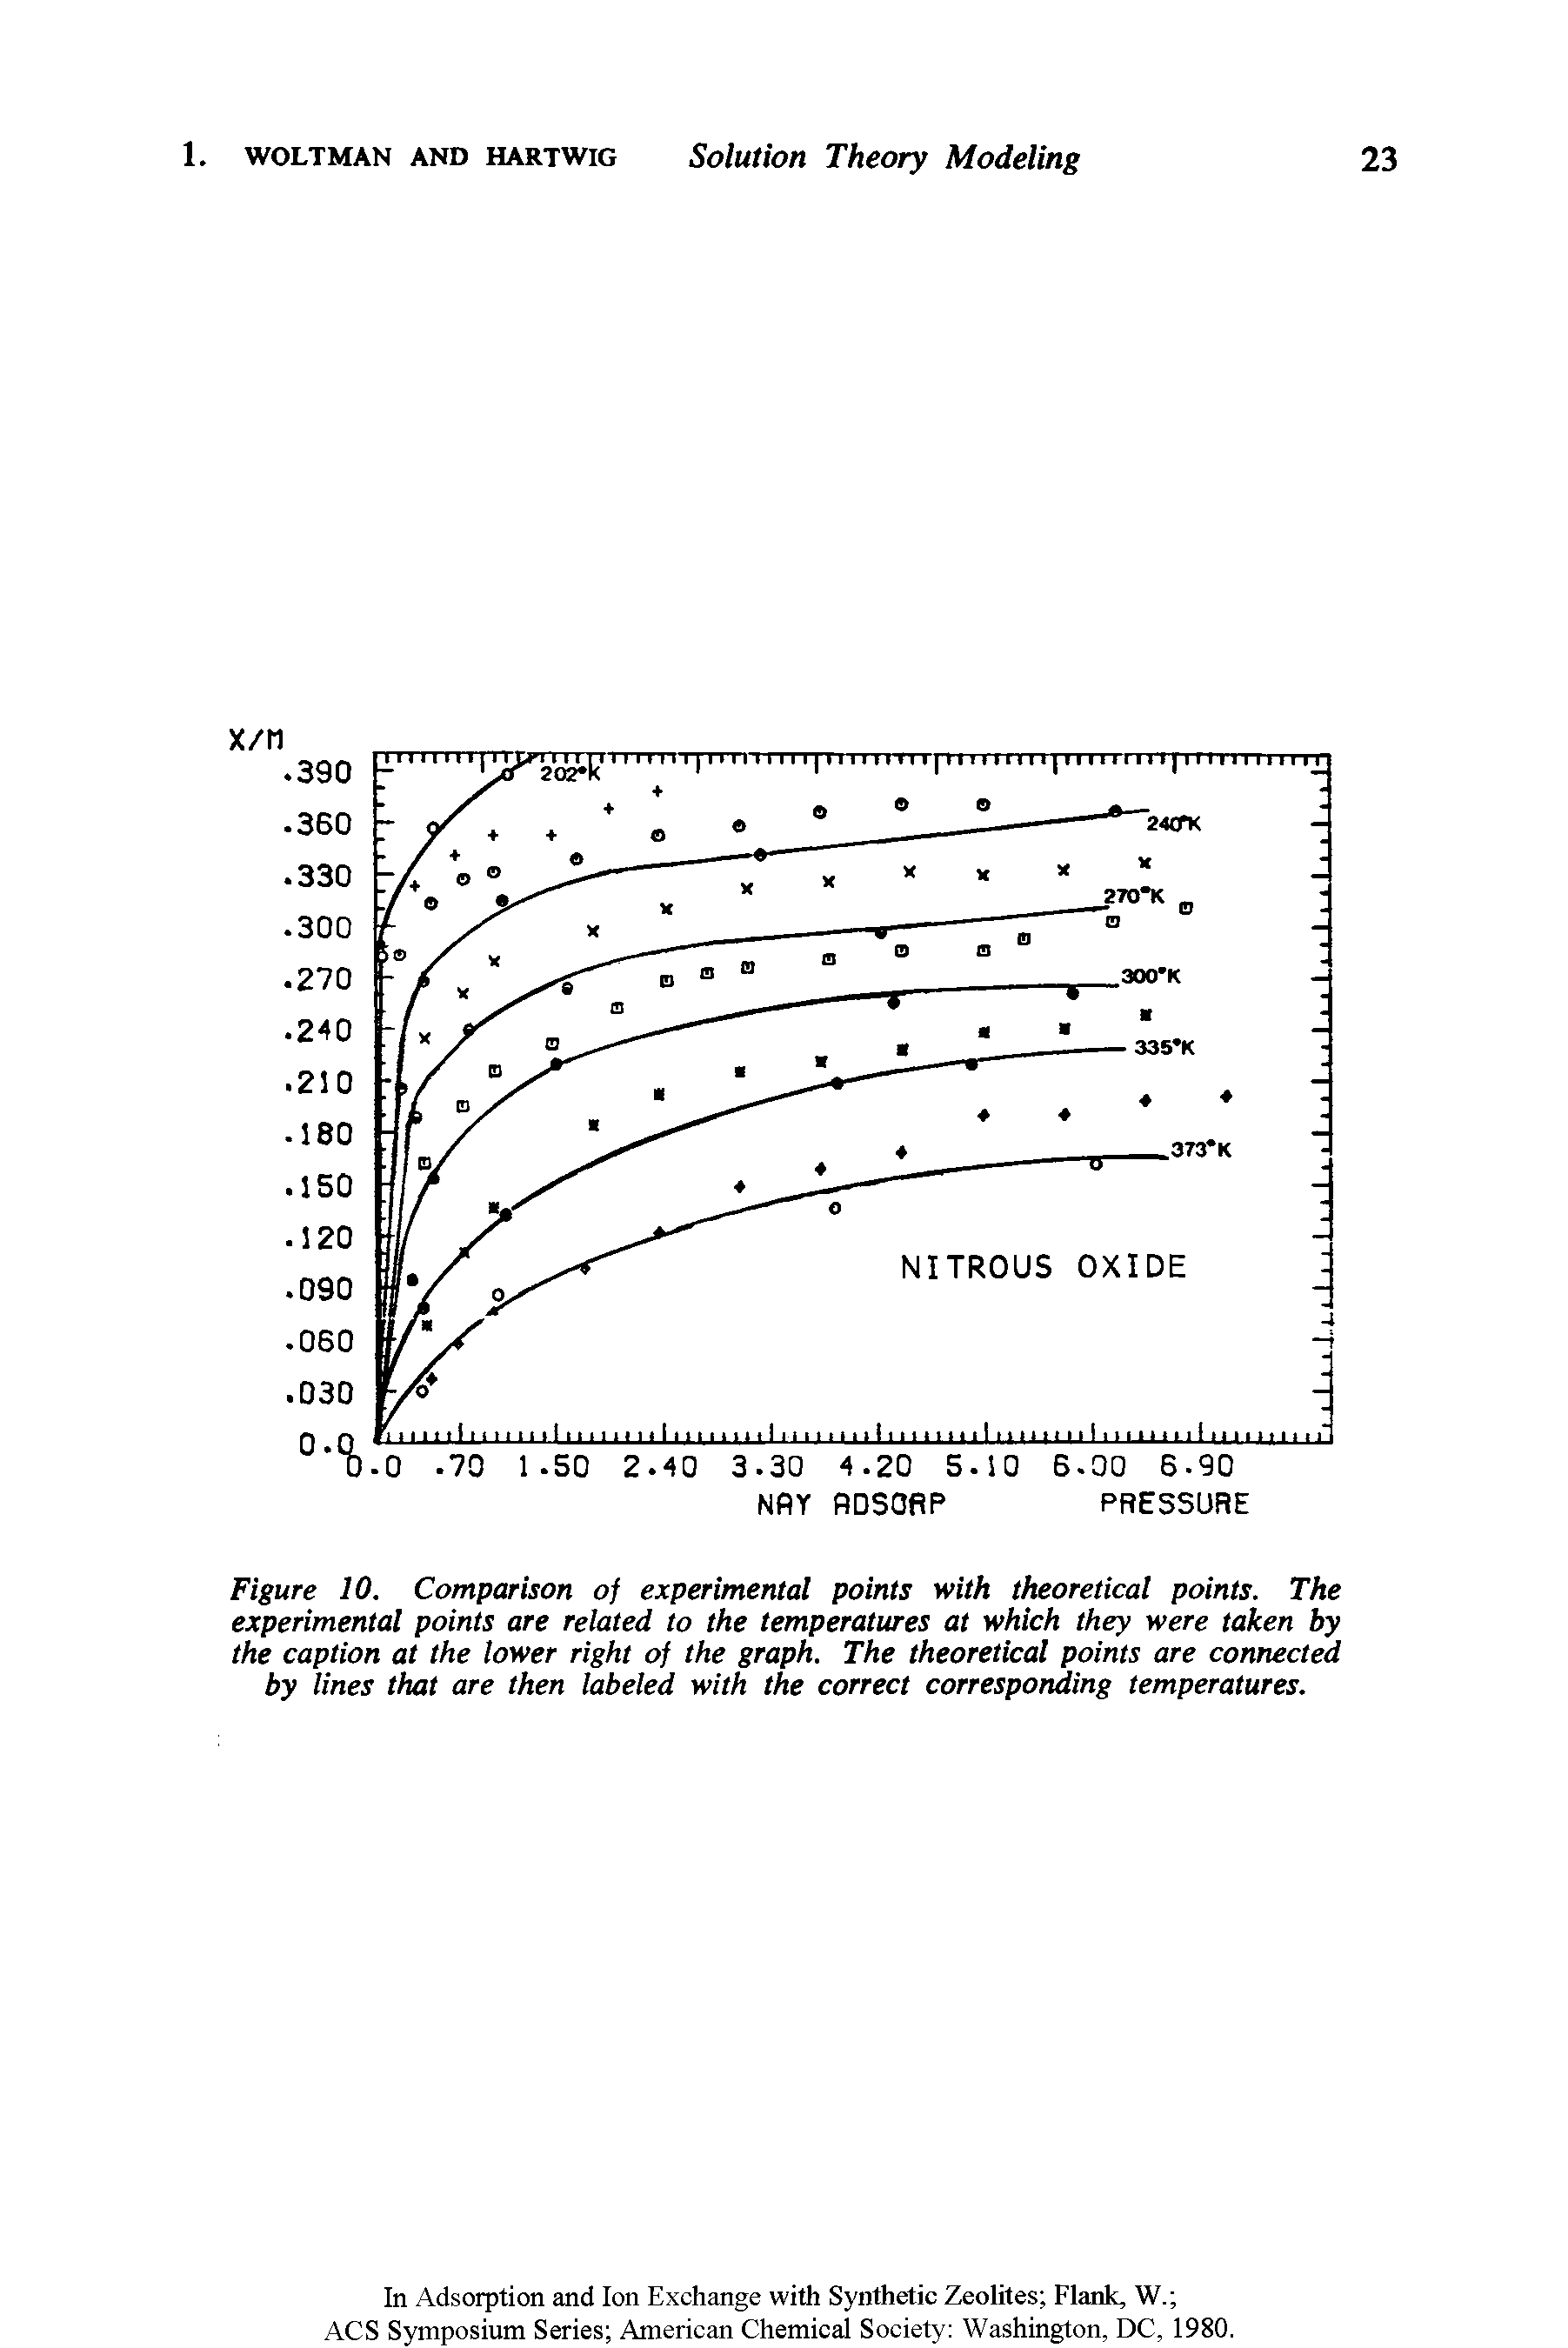 Figure 10. Comparison of experimental points with theoretical points. The experimental points are related to the temperatures at which they were taken by the caption at the lower right of the graph. The theoretical points are connected by lines that are then labeled with the correct corresponding temperatures.